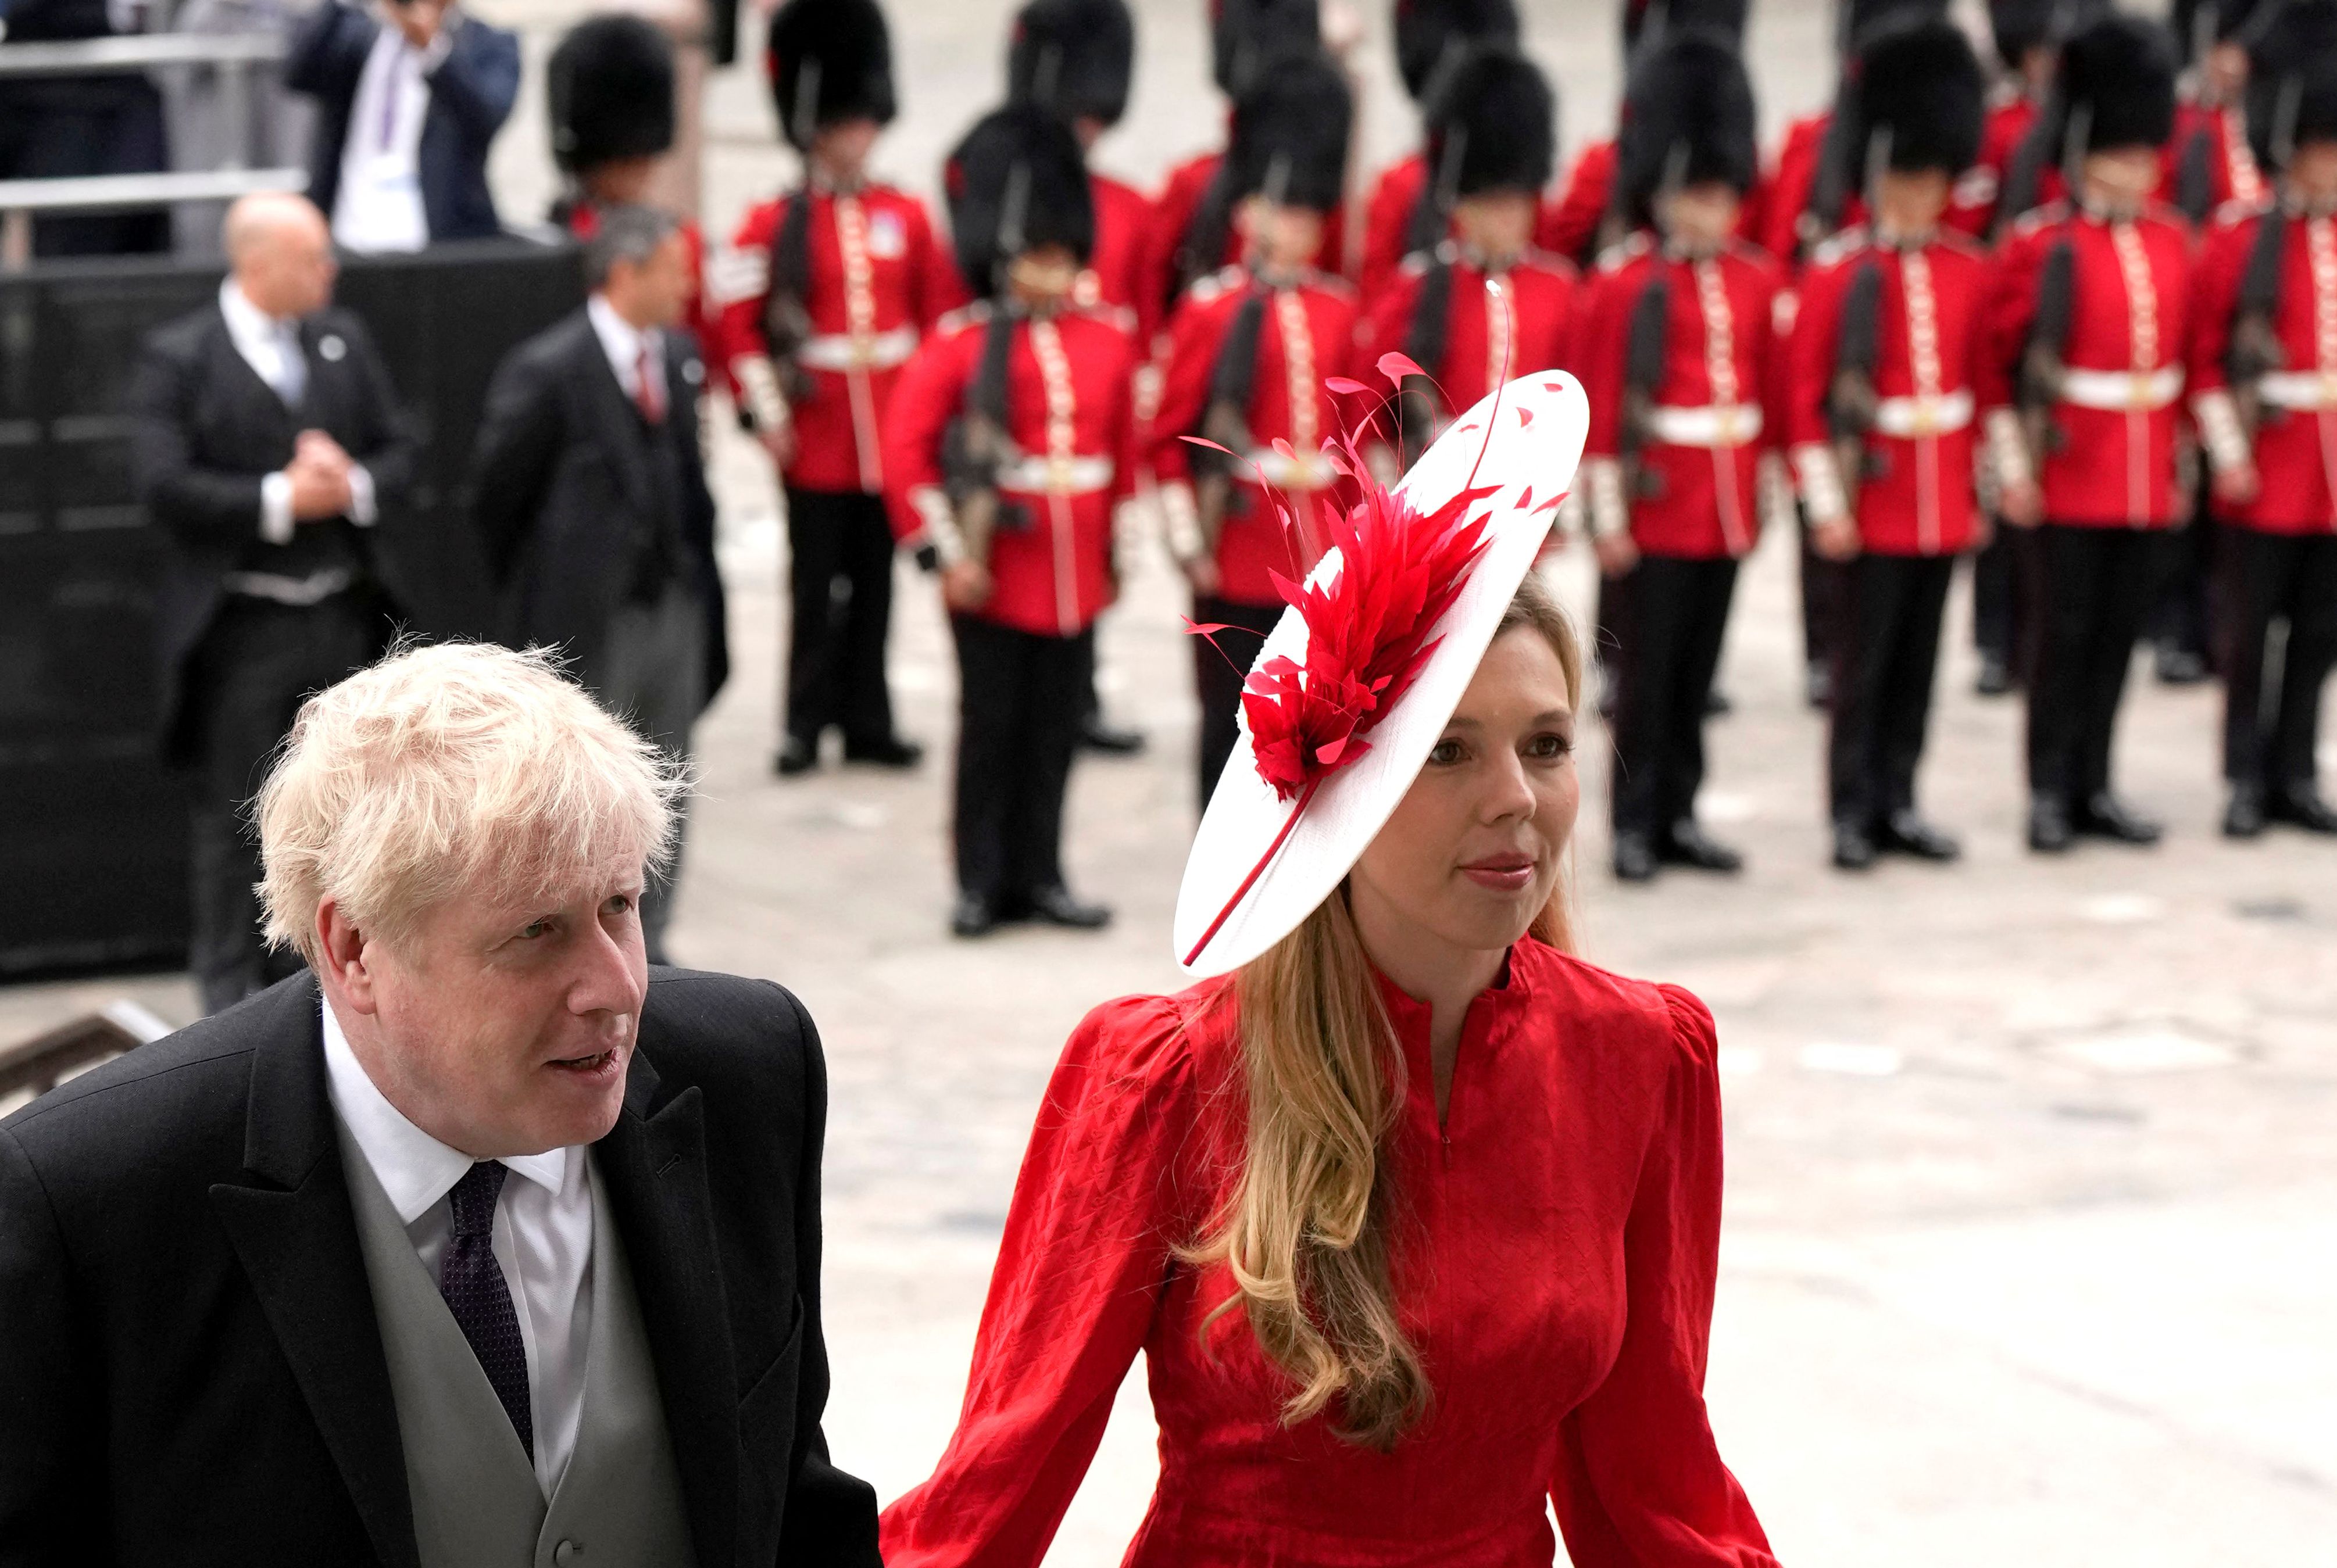 Mr Johnson and his wife Carrie were booed over the weekend